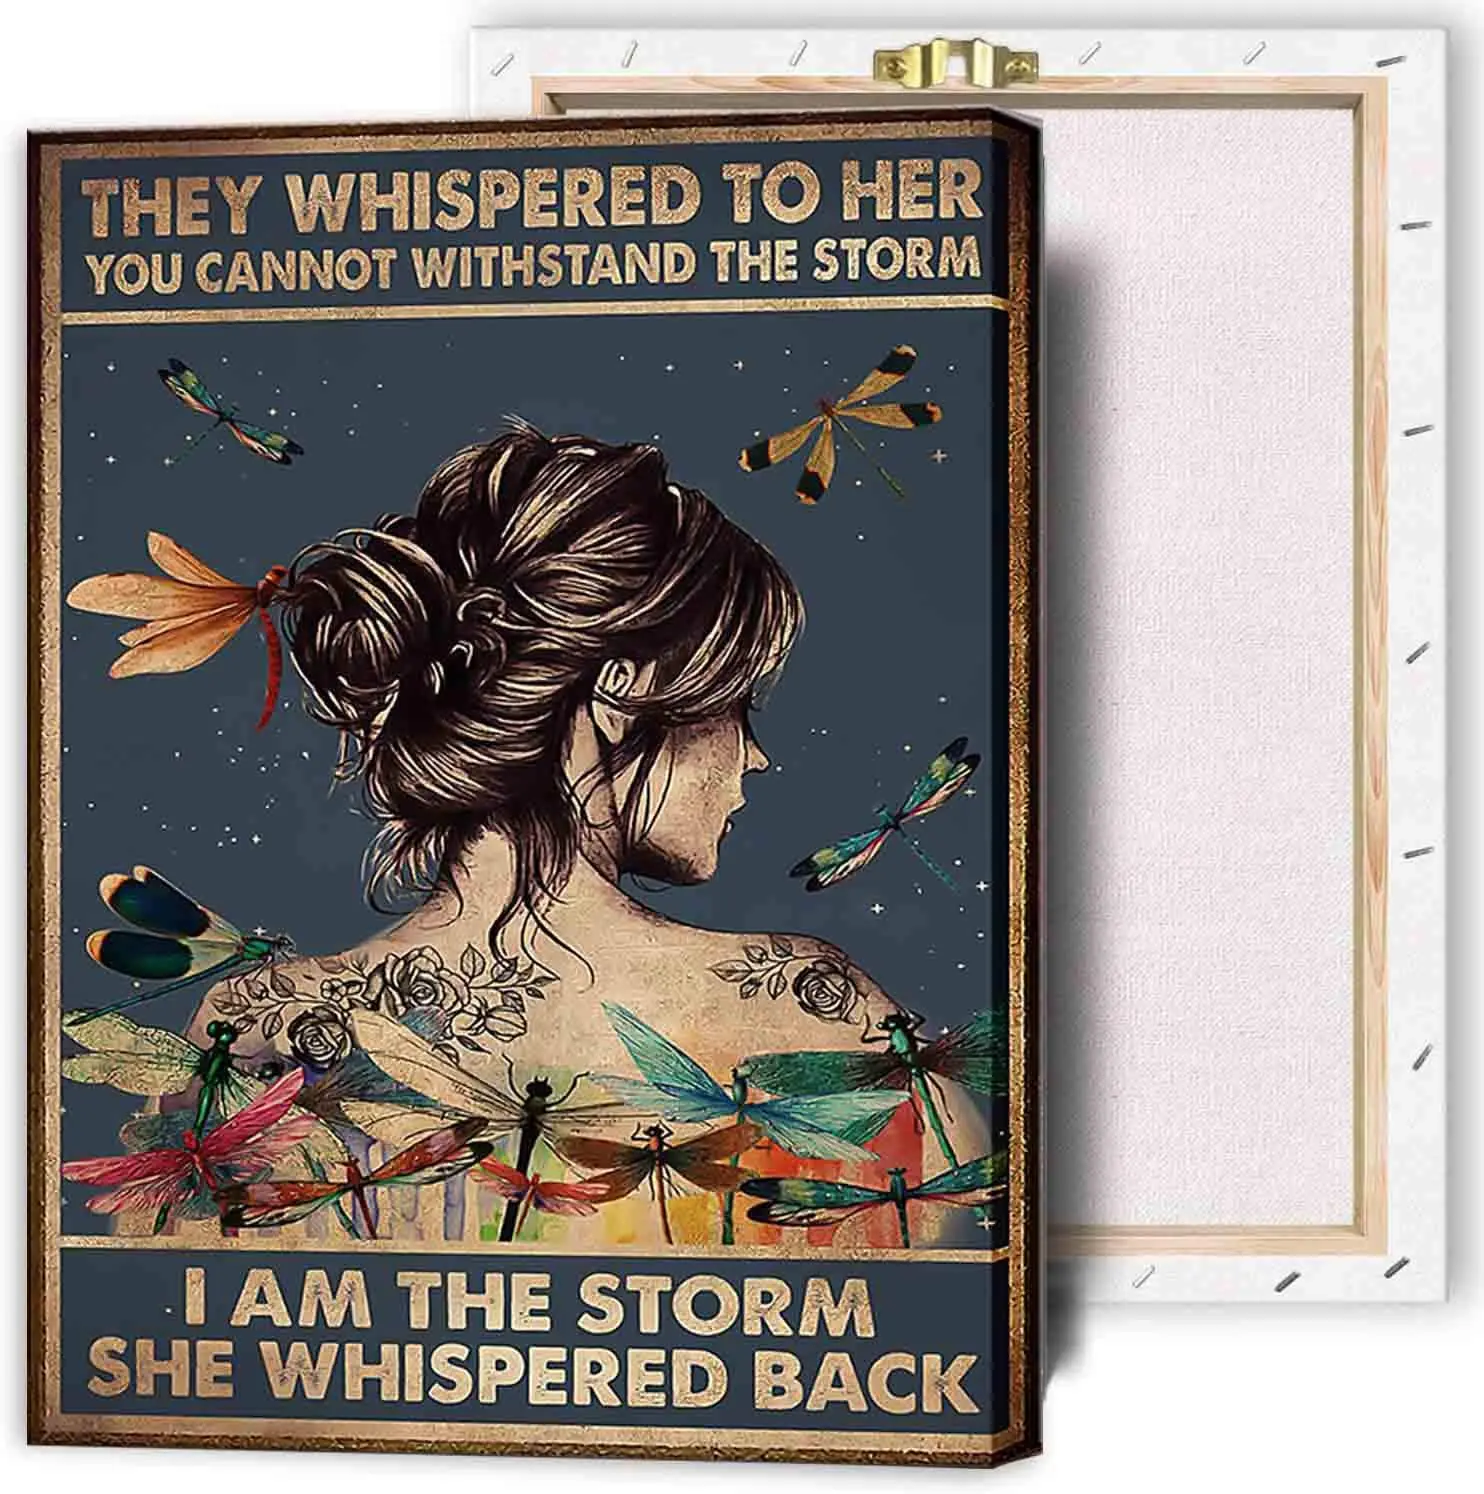 

Inspirational Quote I Am The Storm Wall Art Framed Canvas Print 12x18 Whispered to Her You Cannot Withstand The Storm Back